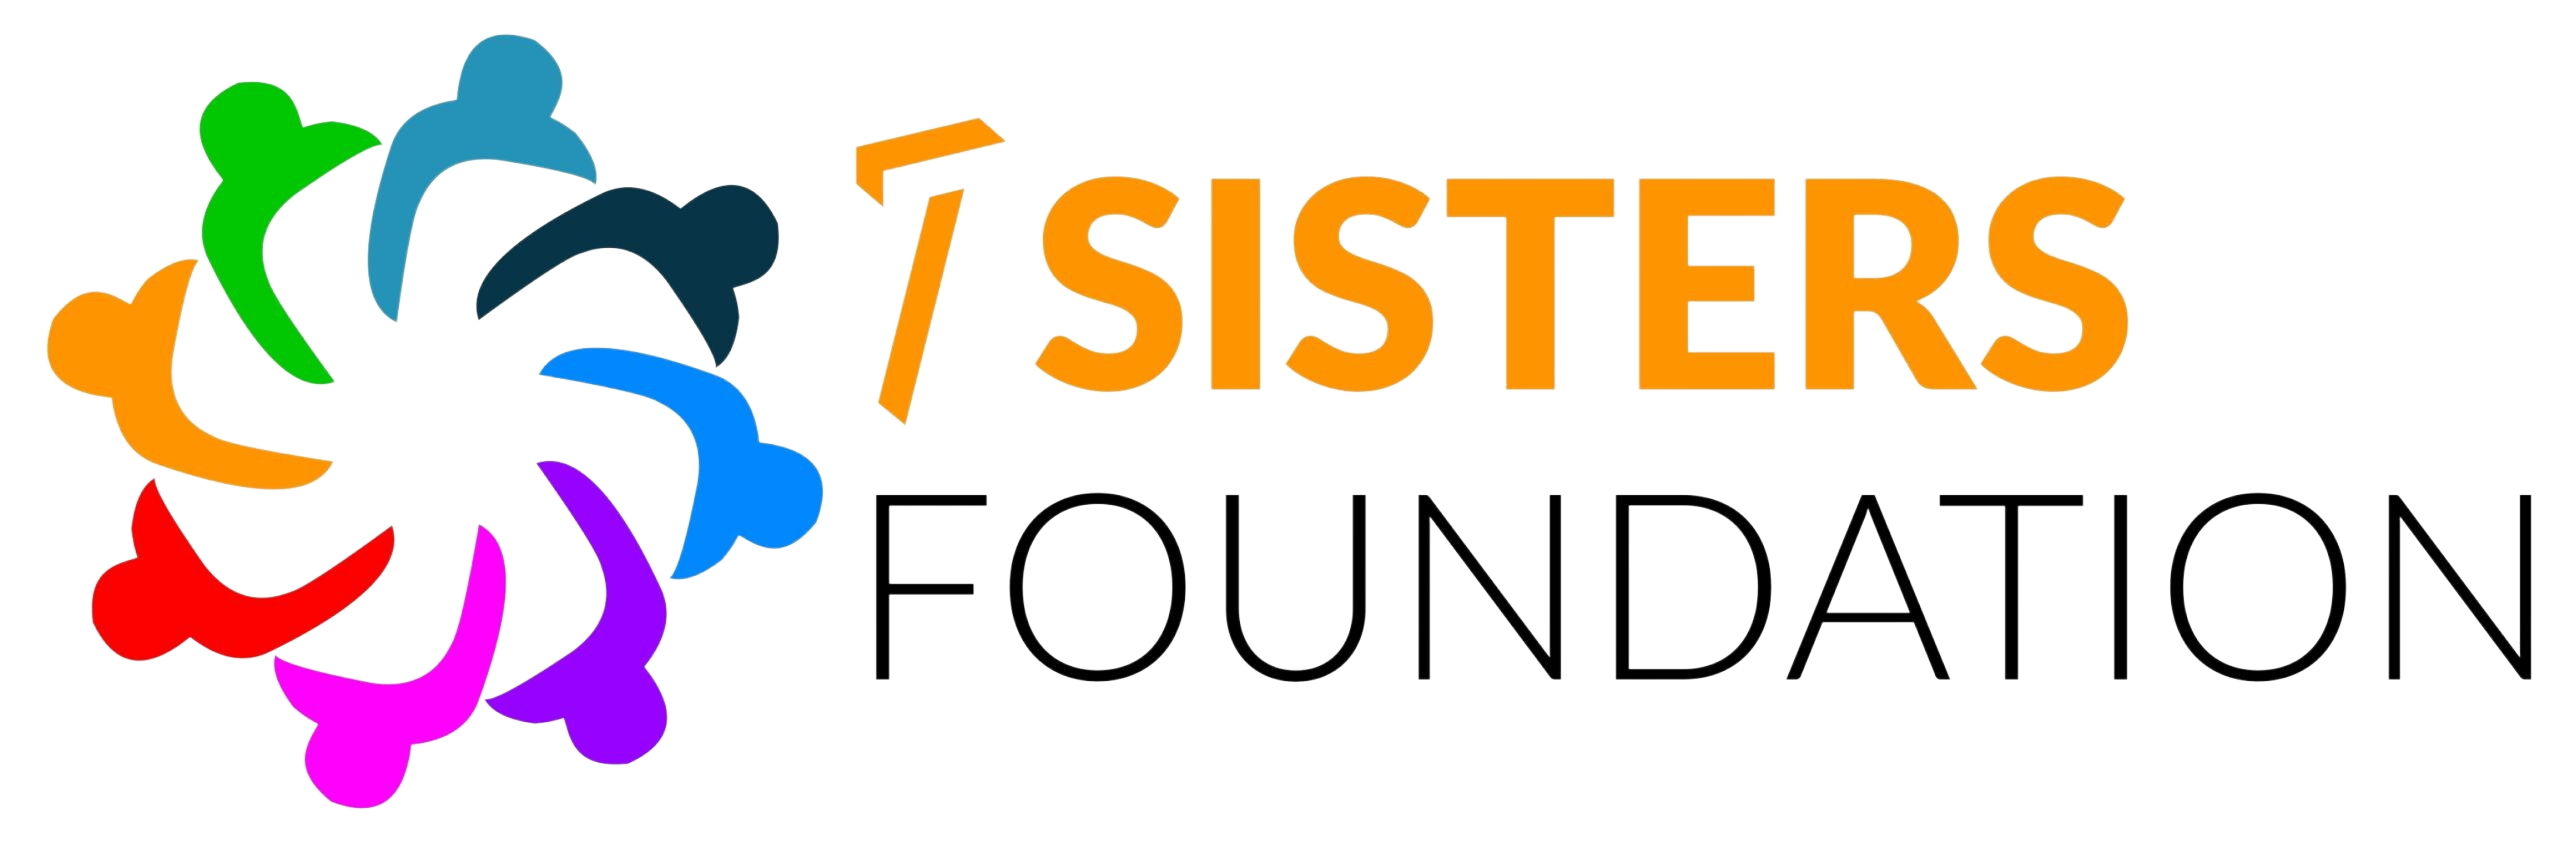 7 Sisters Foundation